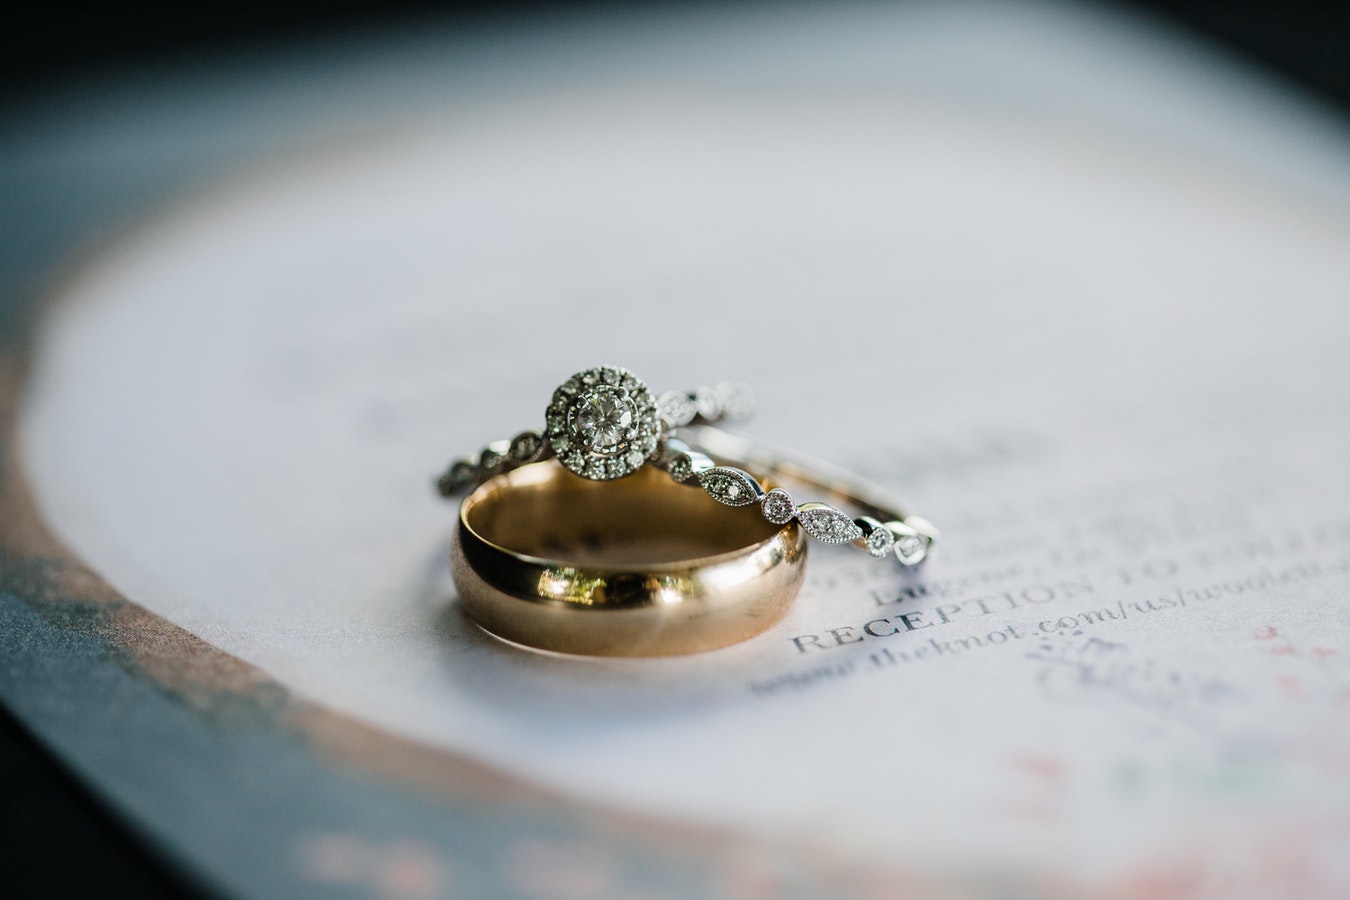 Two diamond engagement rings stacked on a yellow gold wedding band sitting on a white table.